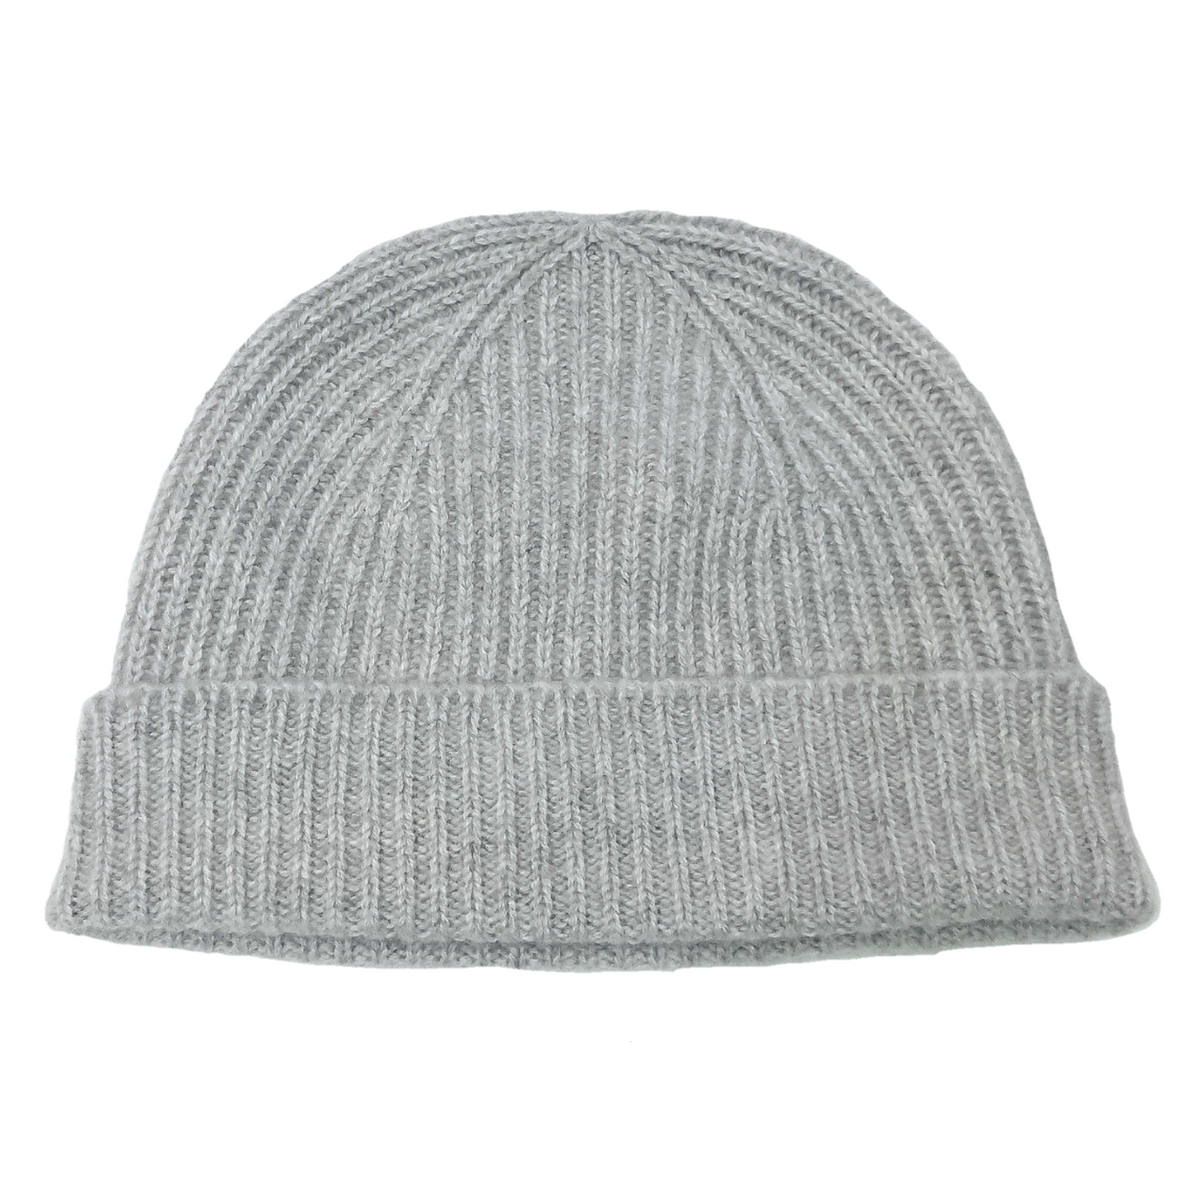 100% Pure Scottish Cashmere Ribbed Beanies